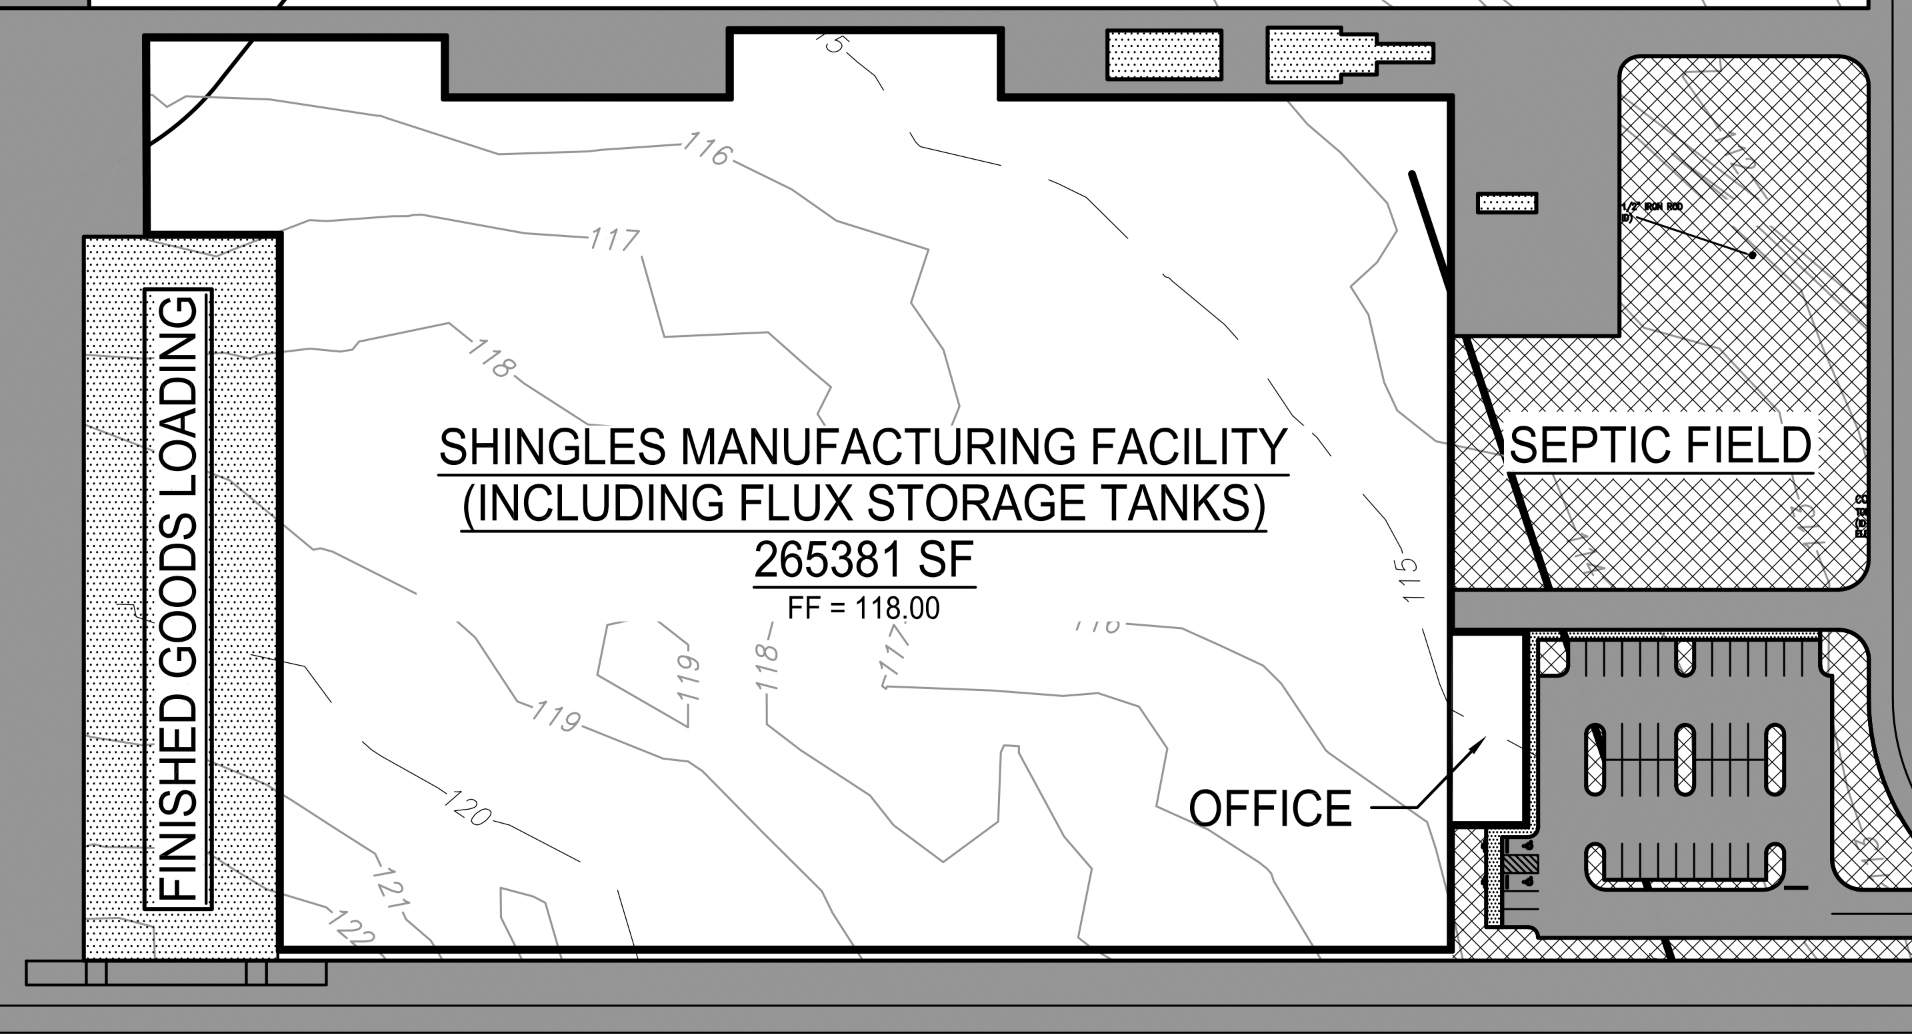 The conceptual site plan shows a 265,381-square-foot shingles manufacturing facility.